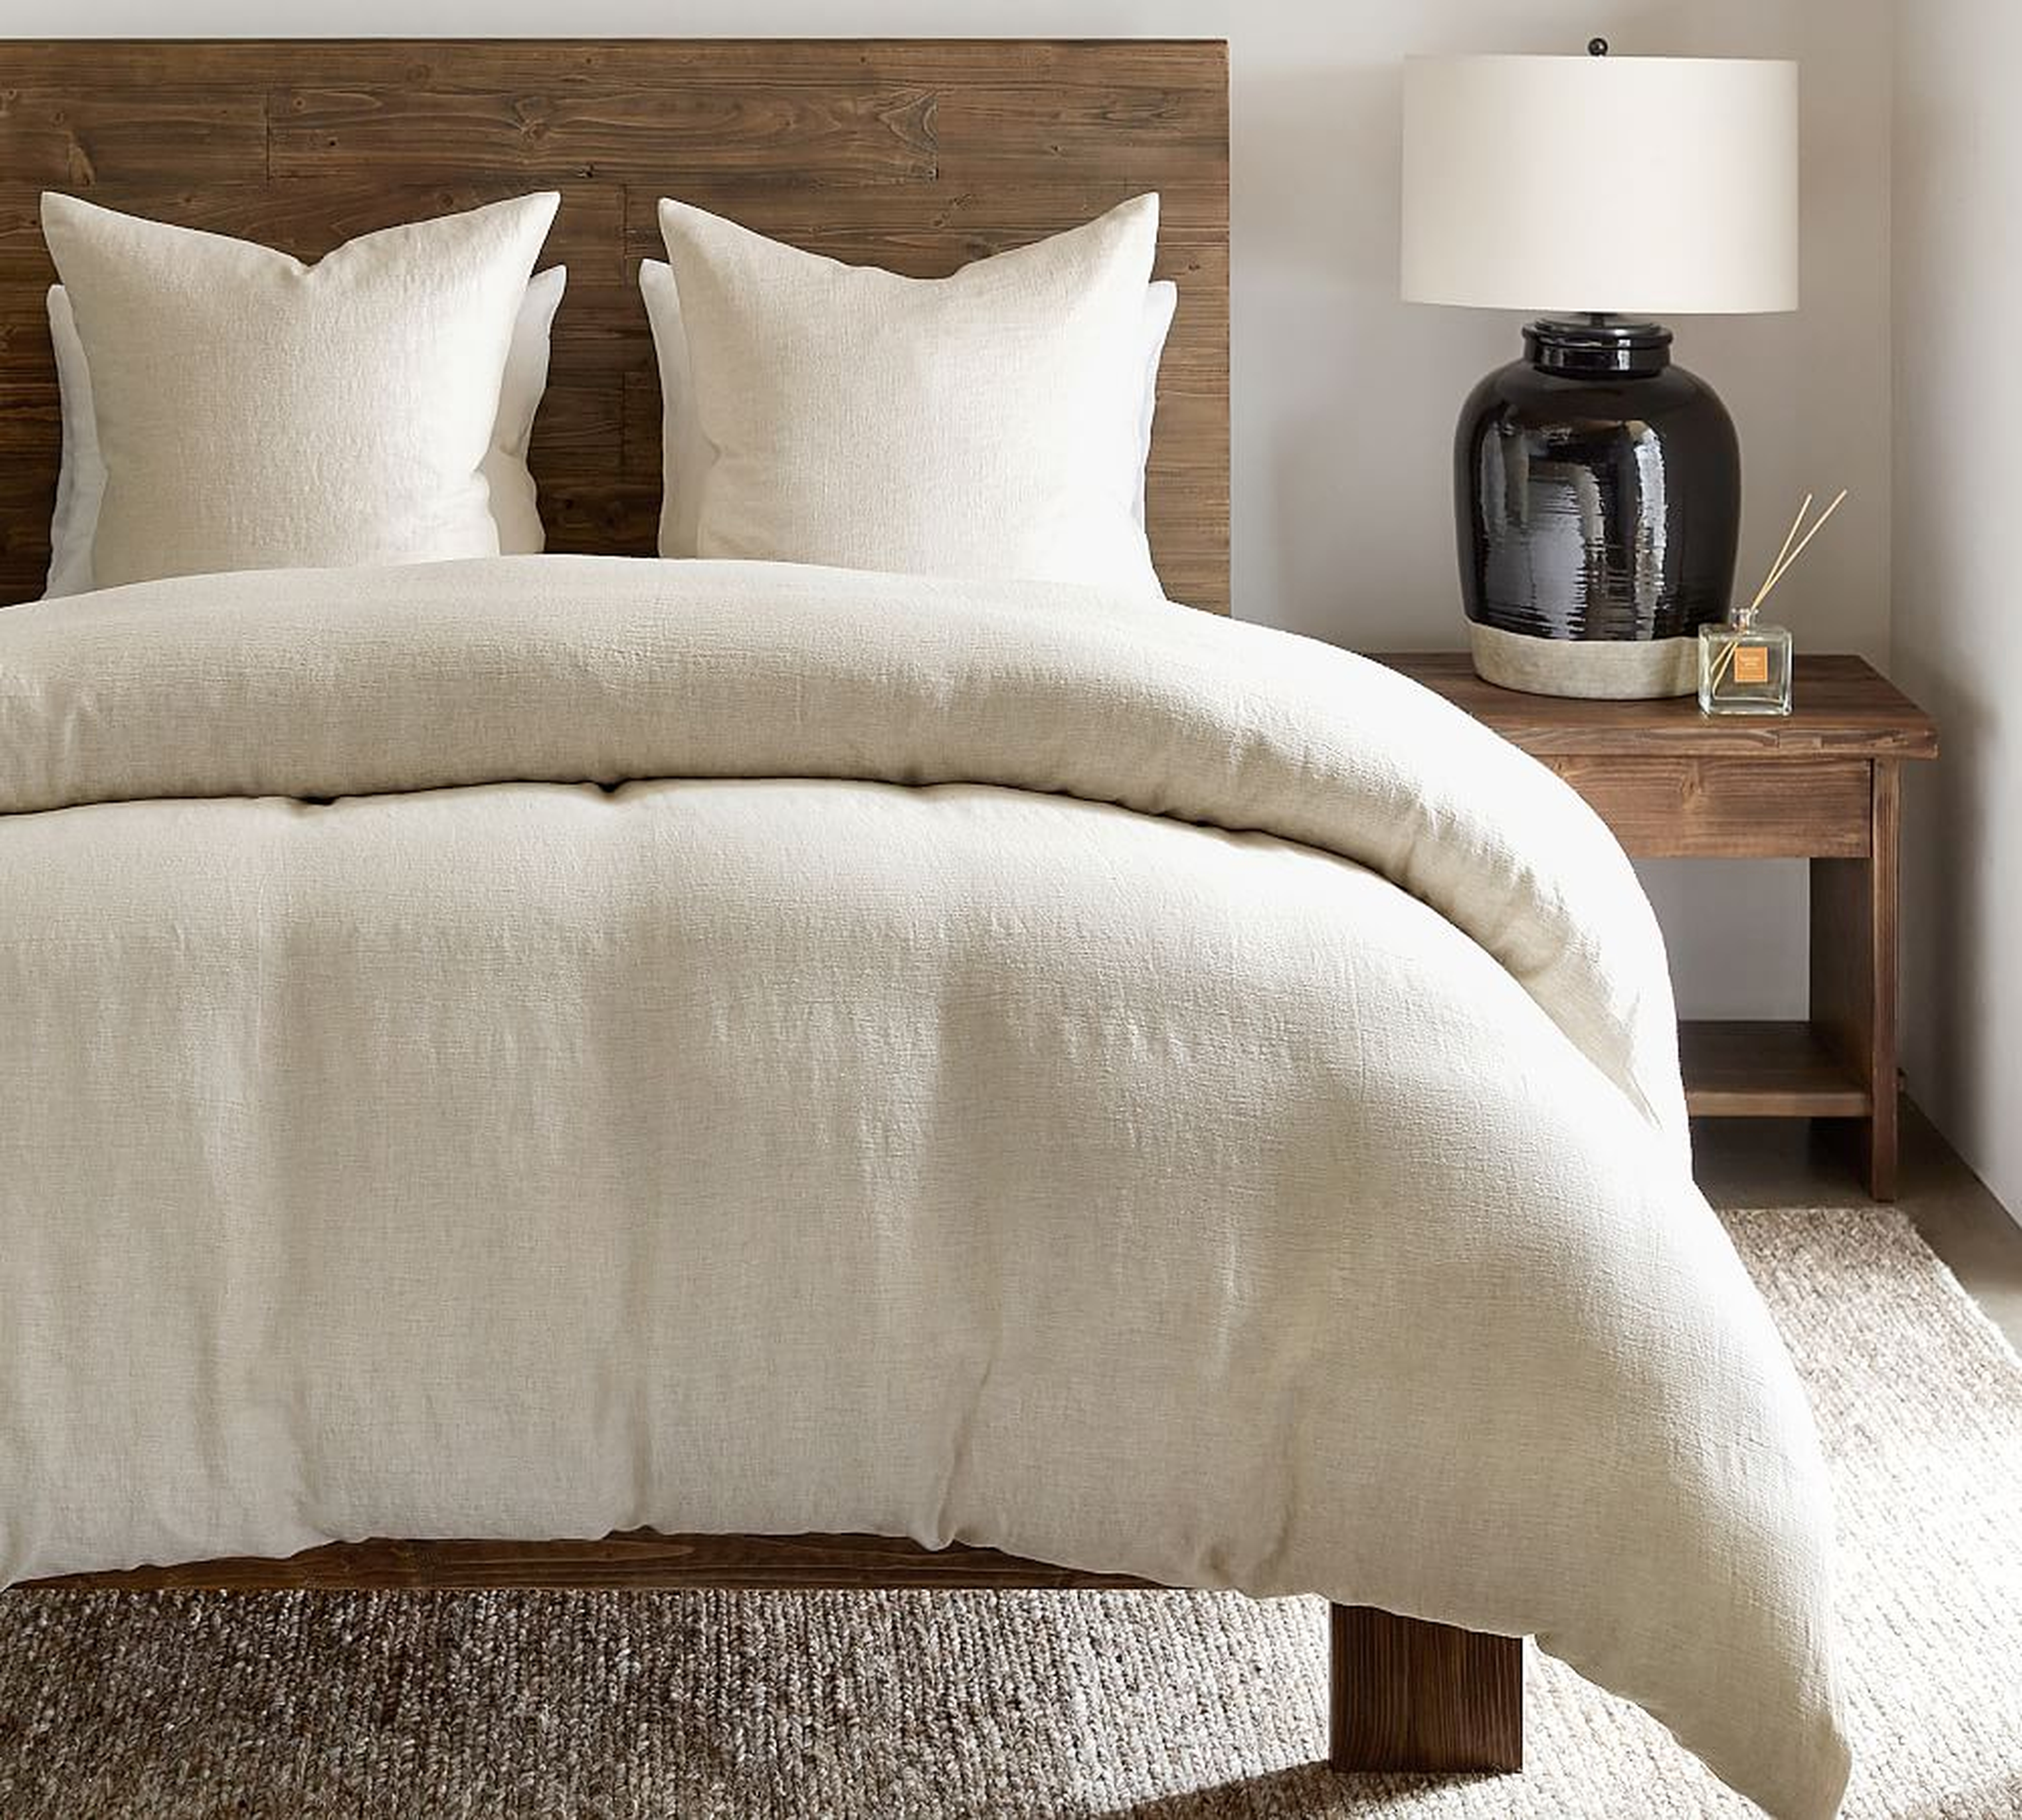 Flax Willow Linen/Cotton Twill Duvet Cover, King/Cal. King - Pottery Barn